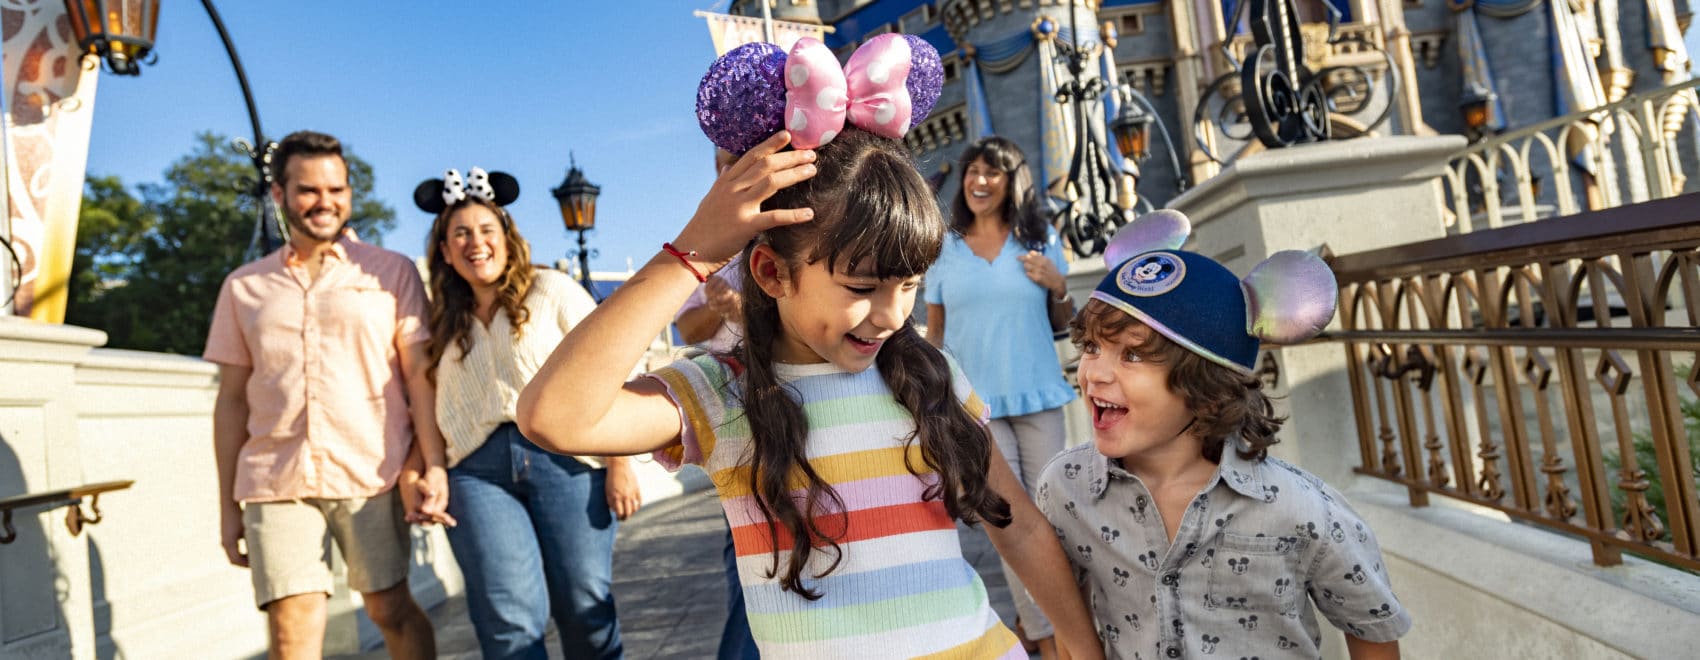 The magic of Walt Disney World brings smiles to parents, kids and grandparents alike